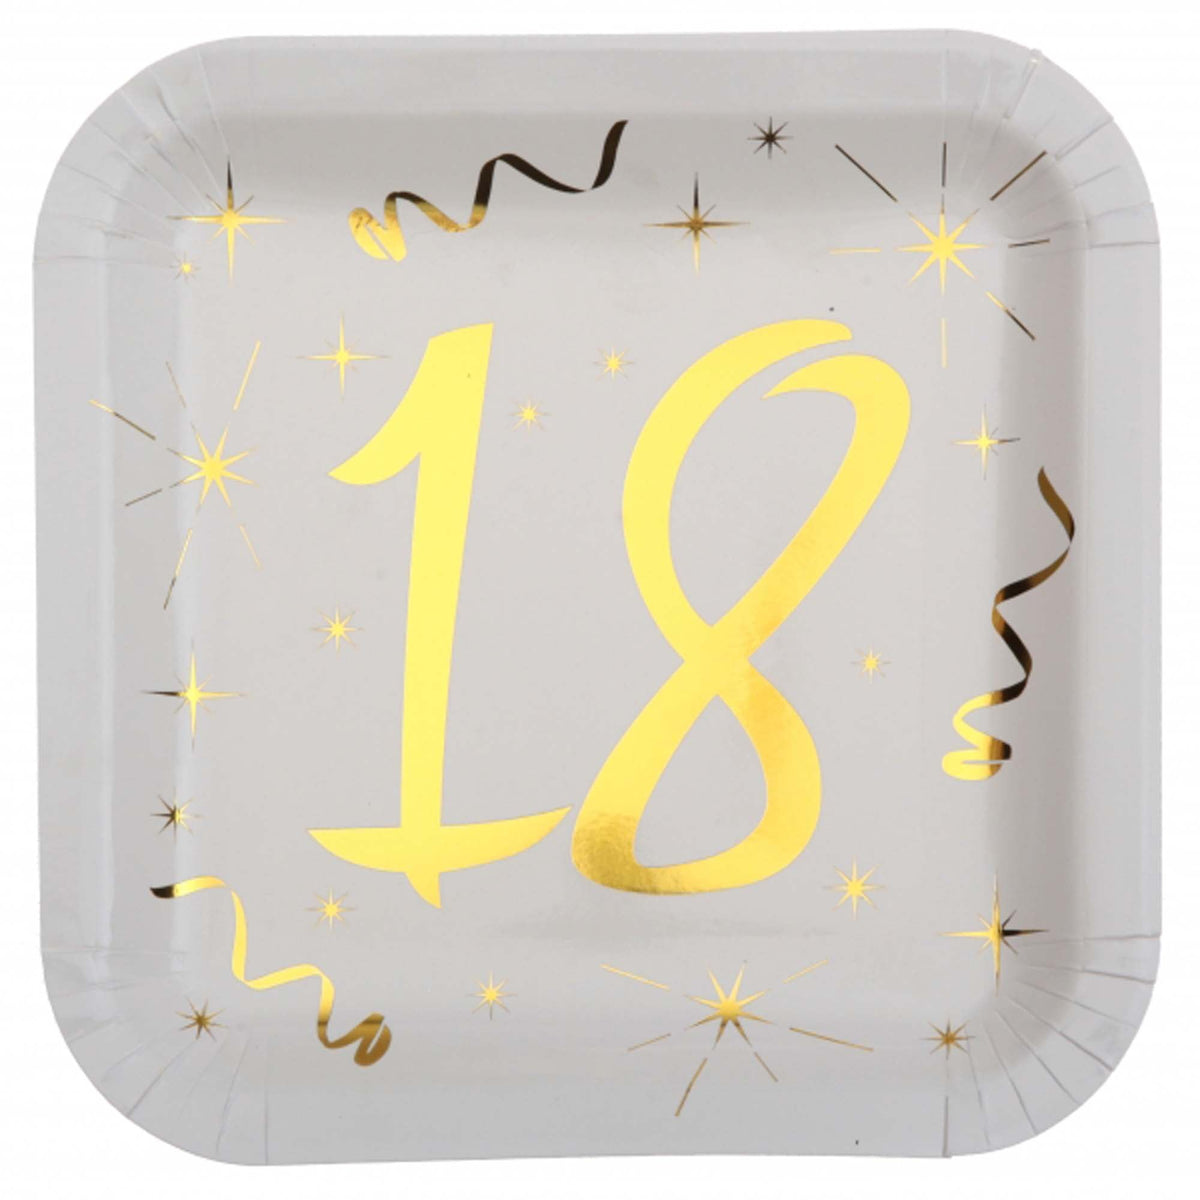 SANTEX General Birthday Starry Golden Age 18th Birthday Large Square Lunch Paper Plates, 9 Inches, 10 Count